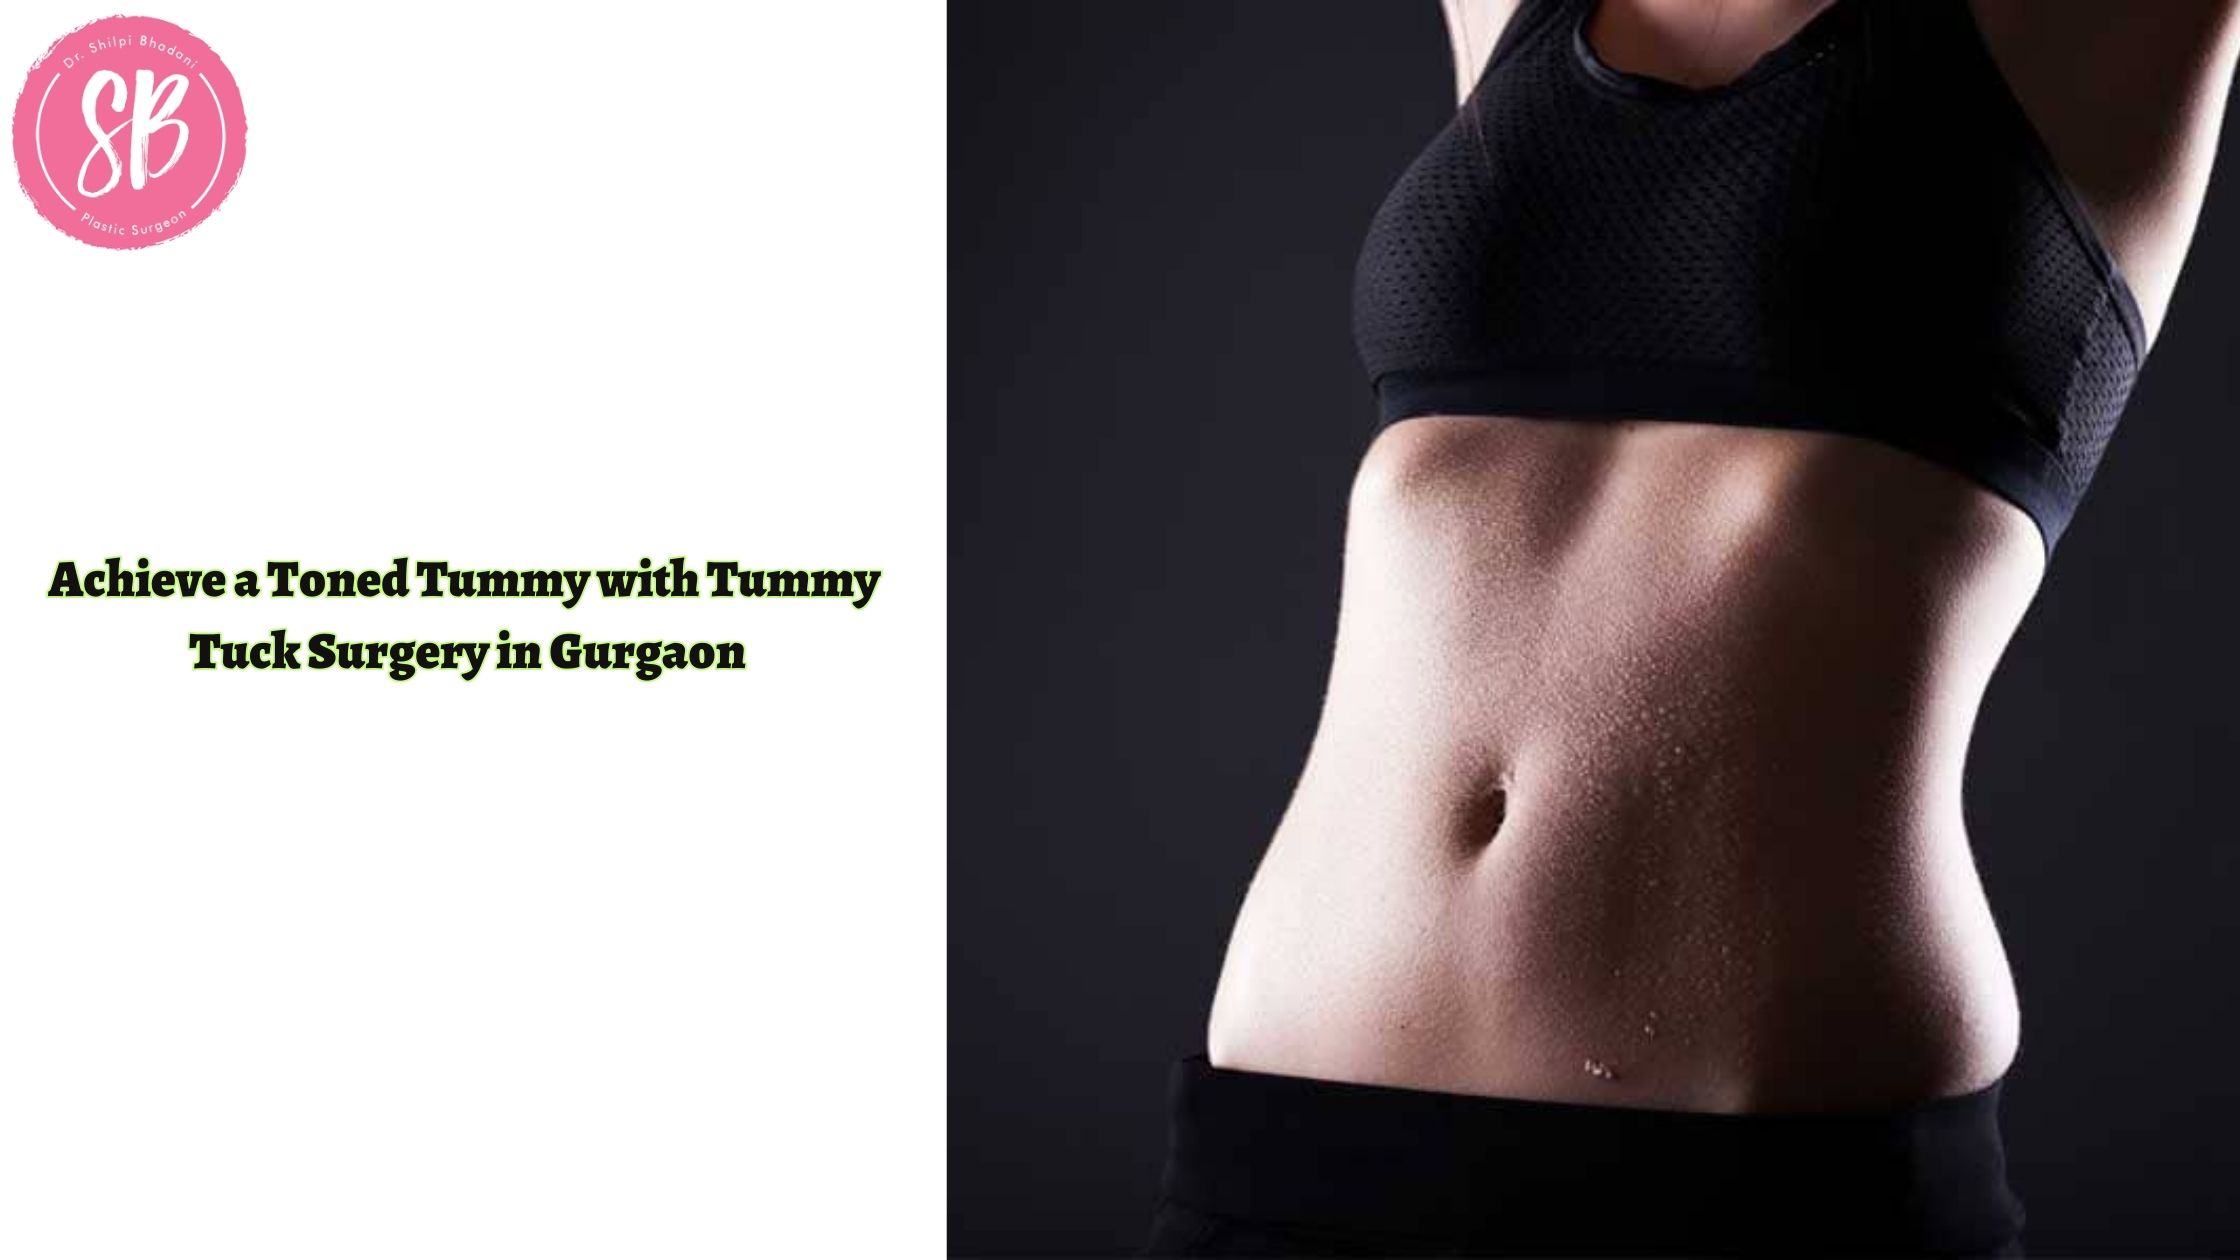 Achieve a Toned Tummy with Tummy Tuck Surgery in Gurgaon